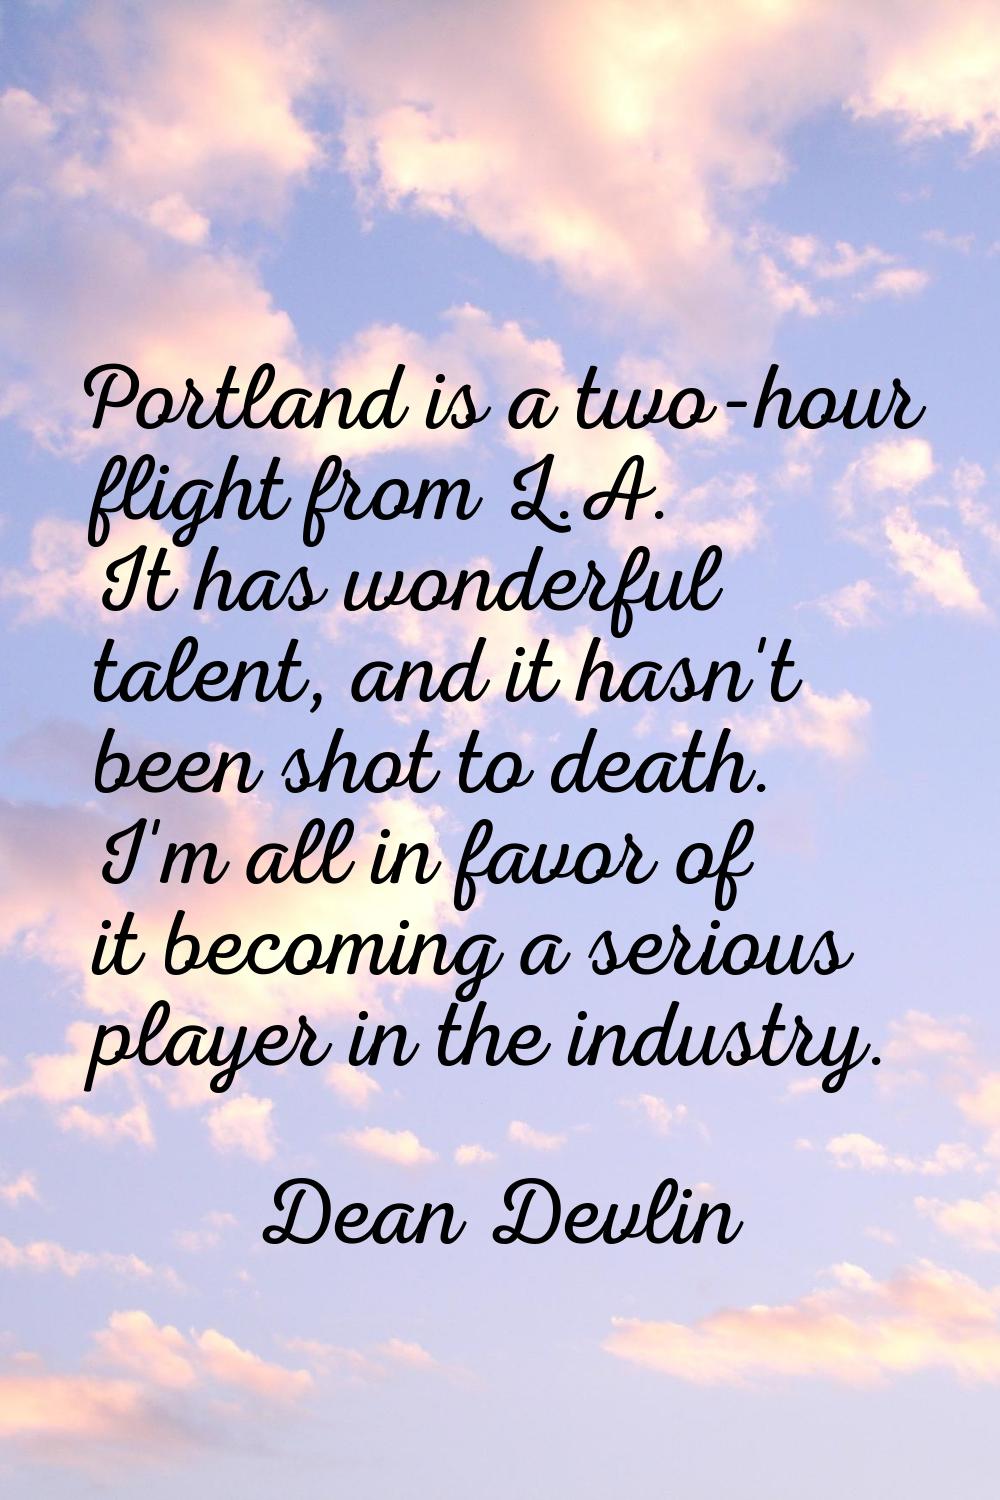 Portland is a two-hour flight from L.A. It has wonderful talent, and it hasn't been shot to death. 